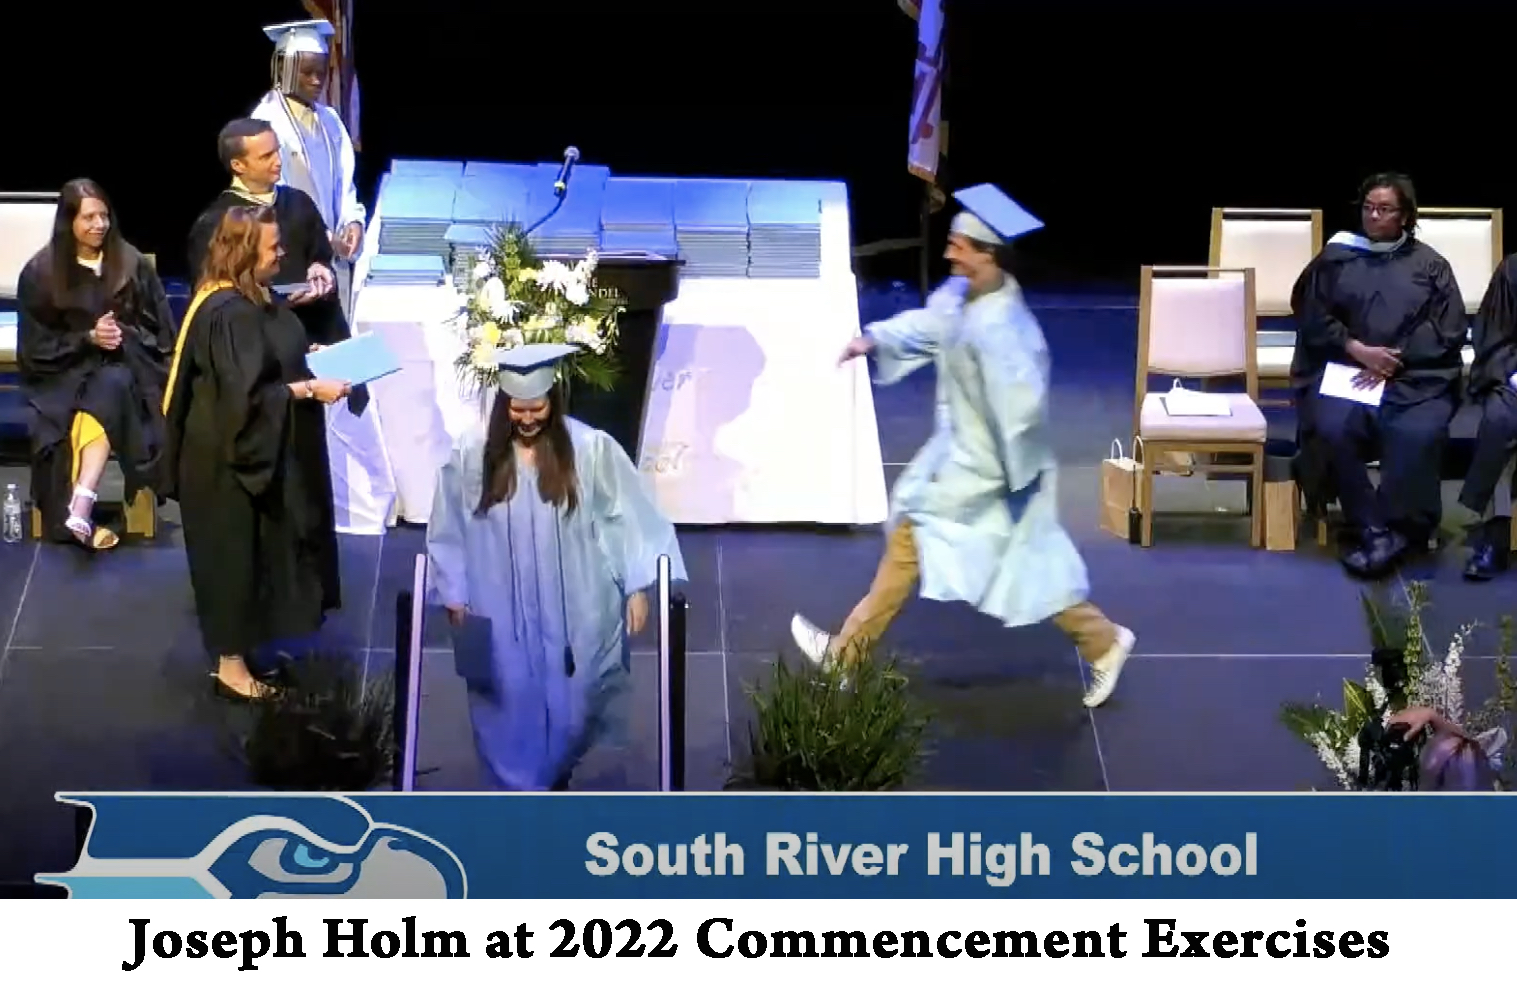 Joseph Holm bounces across the stage at his graduation